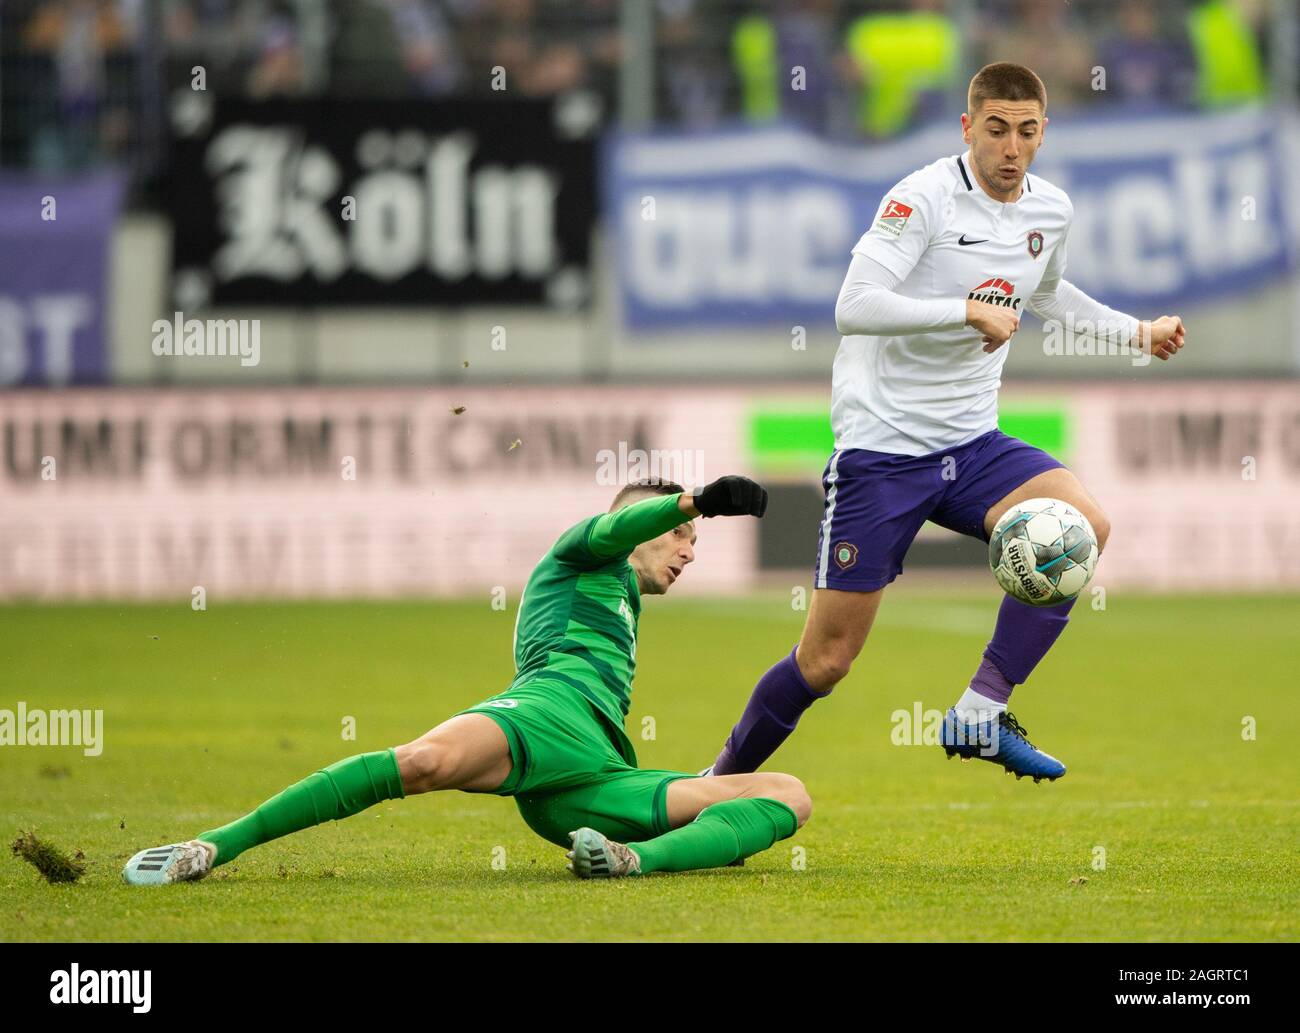 21 December 2019, Saxony, Aue: Football: 2nd Bundesliga, FC Erzgebirge Aue - SpVgg Greuther Fürth, 18th matchday, at the Sparkassen-Erzgebirgsstadion. Aues Marko Mihojevic (r) against Fürths Branimir Hrgota. Photo: Robert Michael/dpa-Zentralbild/dpa - IMPORTANT NOTE: In accordance with the regulations of the DFL Deutsche Fußball Liga and the DFB Deutscher Fußball-Bund, it is prohibited to exploit or have exploited in the stadium and/or from the game taken photographs in the form of sequence images and/or video-like photo series. Stock Photo